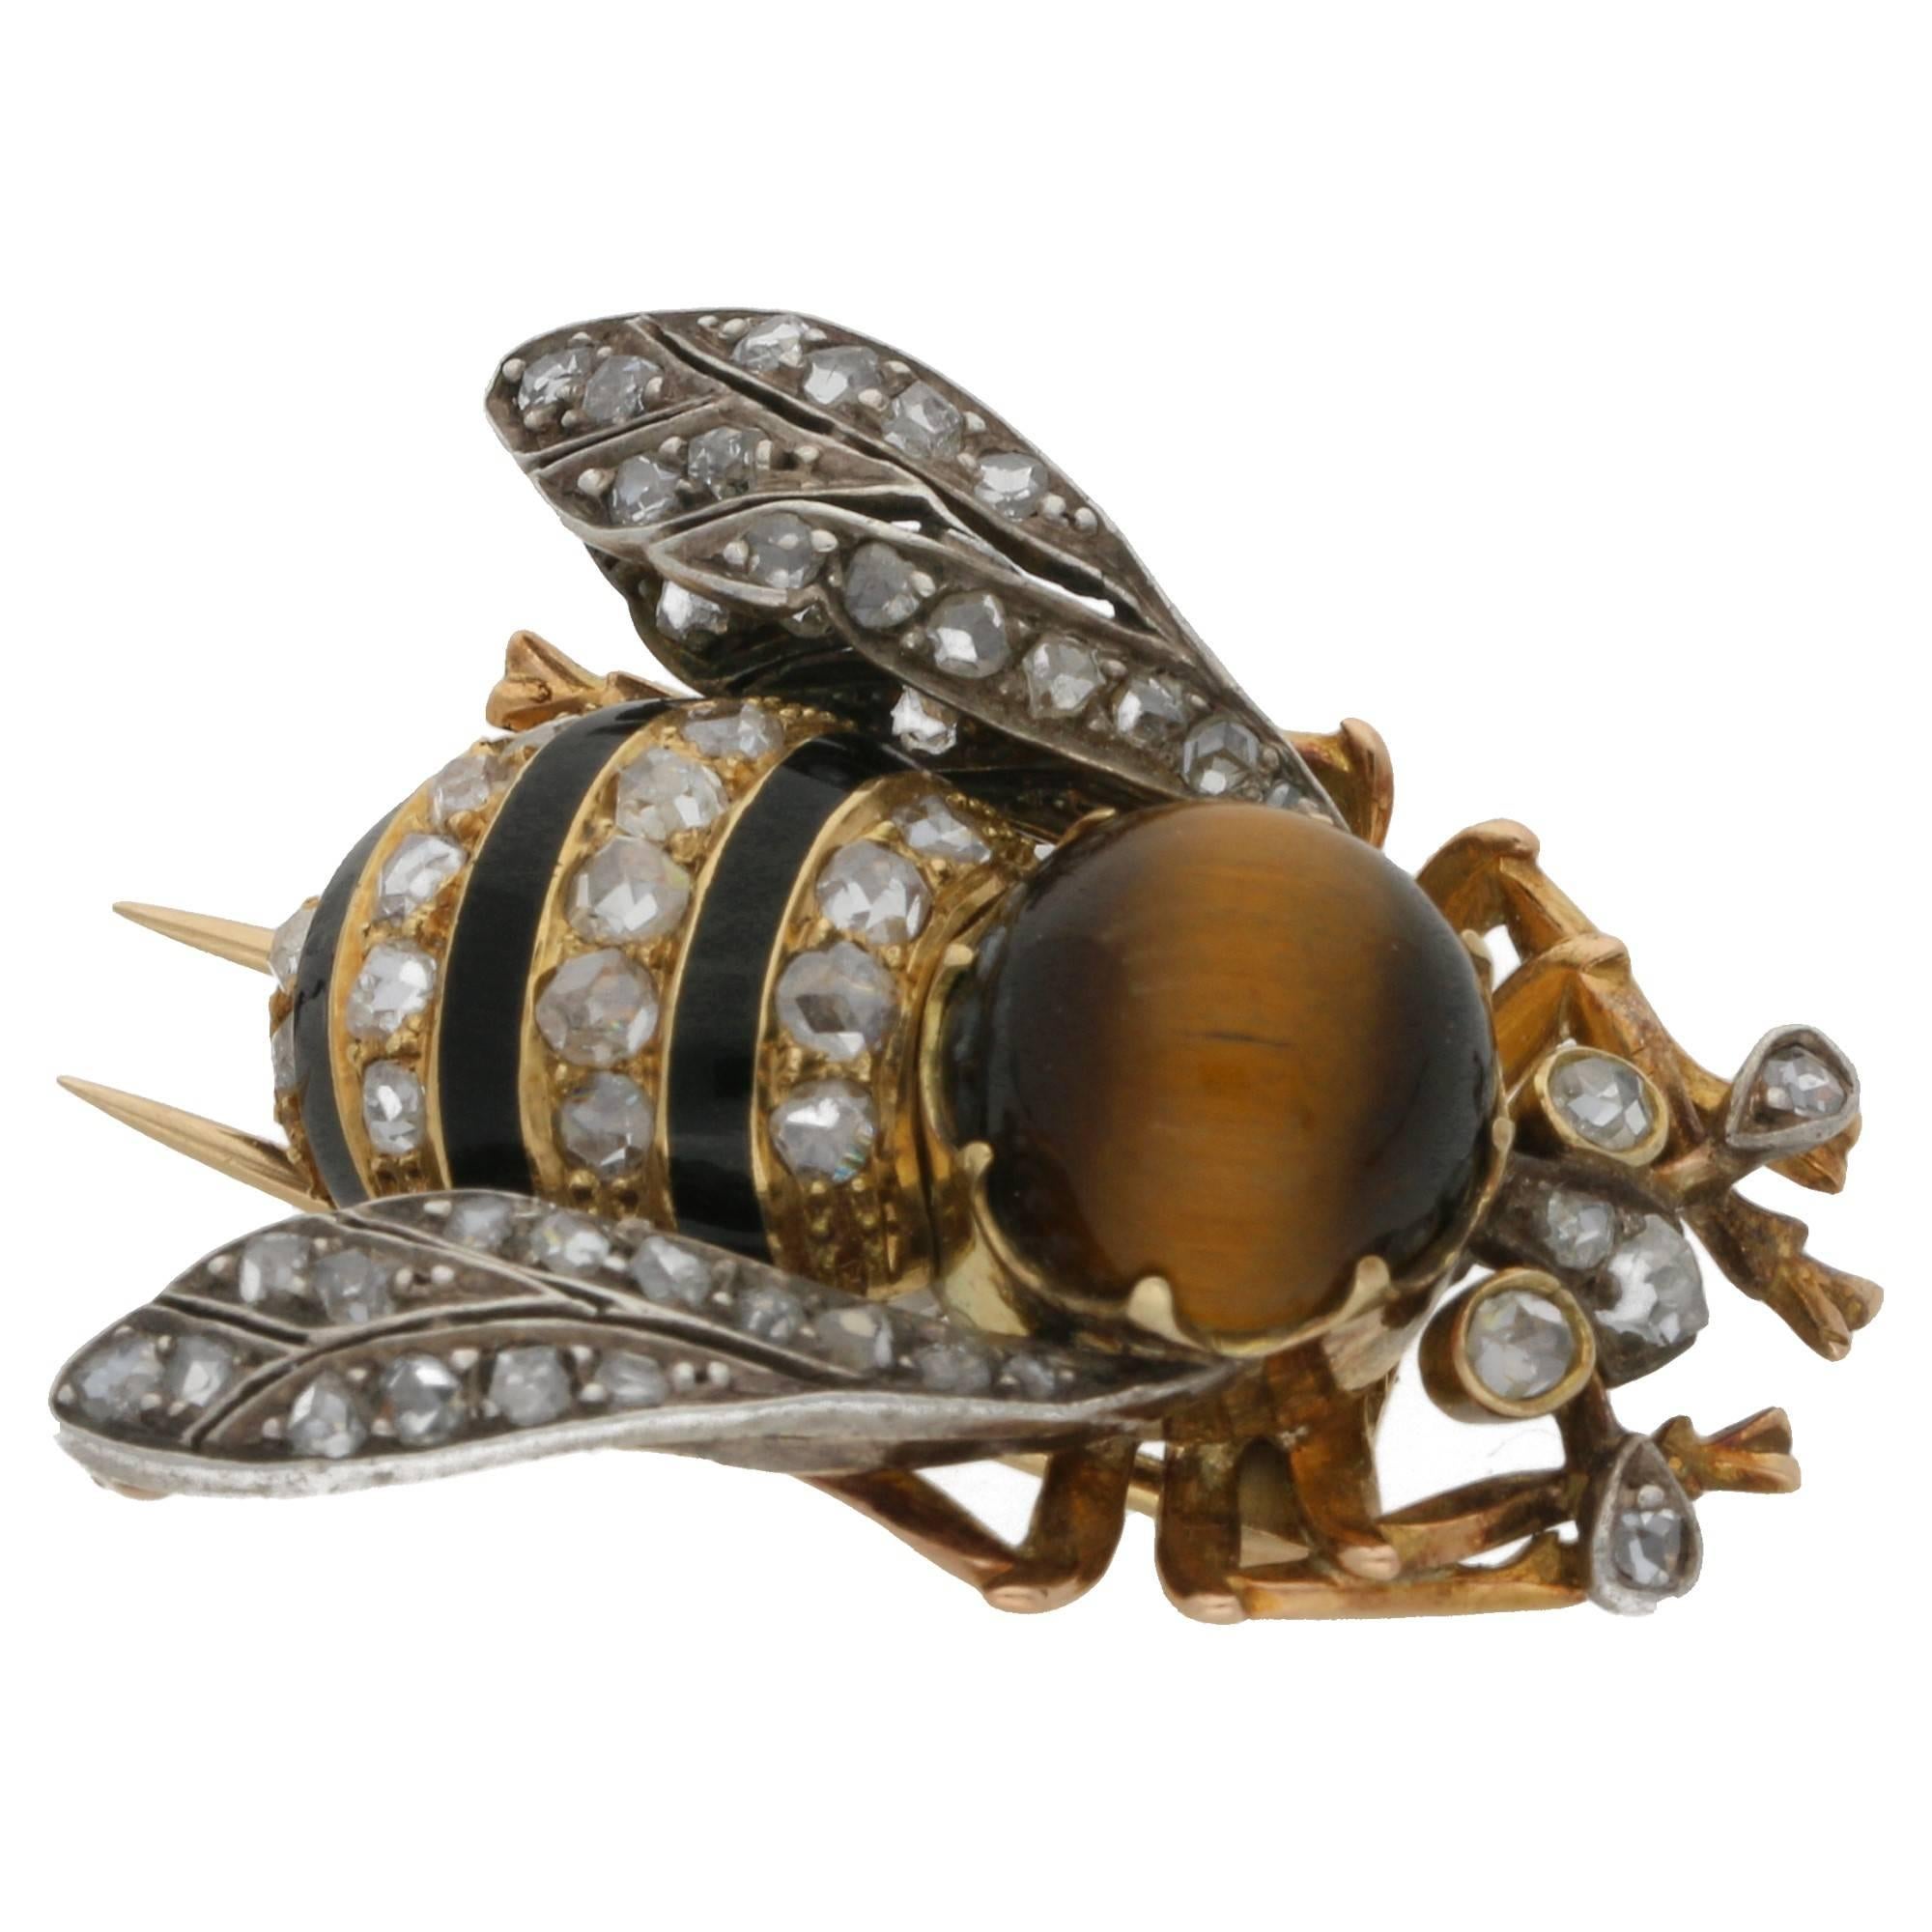 A striking Victorian tiger's eye, diamond and black enamel bee brooch set in silver on gold.The thorax is a cabochon tiger's eye quartz, the abdomen is covered with alternating bands of black enamel and french rose-cut diamonds, the pierced openwork